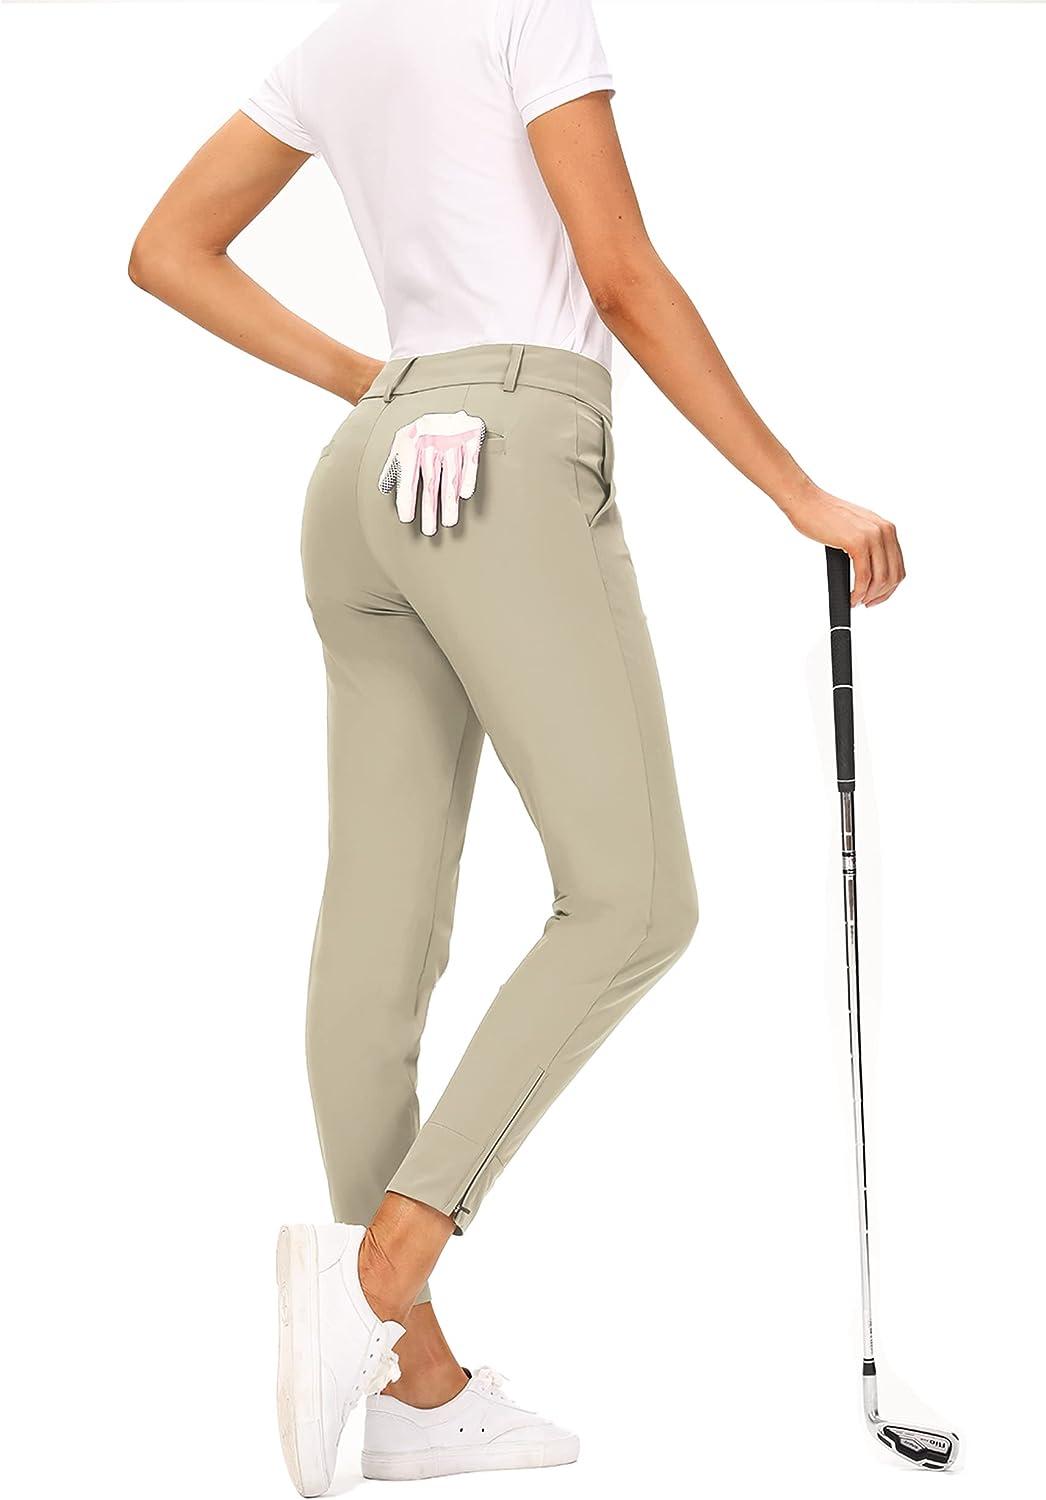 Hiverlay Womens pro Golf Pants Quick Dry Slim Lightweight Work Pants with  Straight Ankle Also for Hiking or Casual Ladies Light Khaki Medium